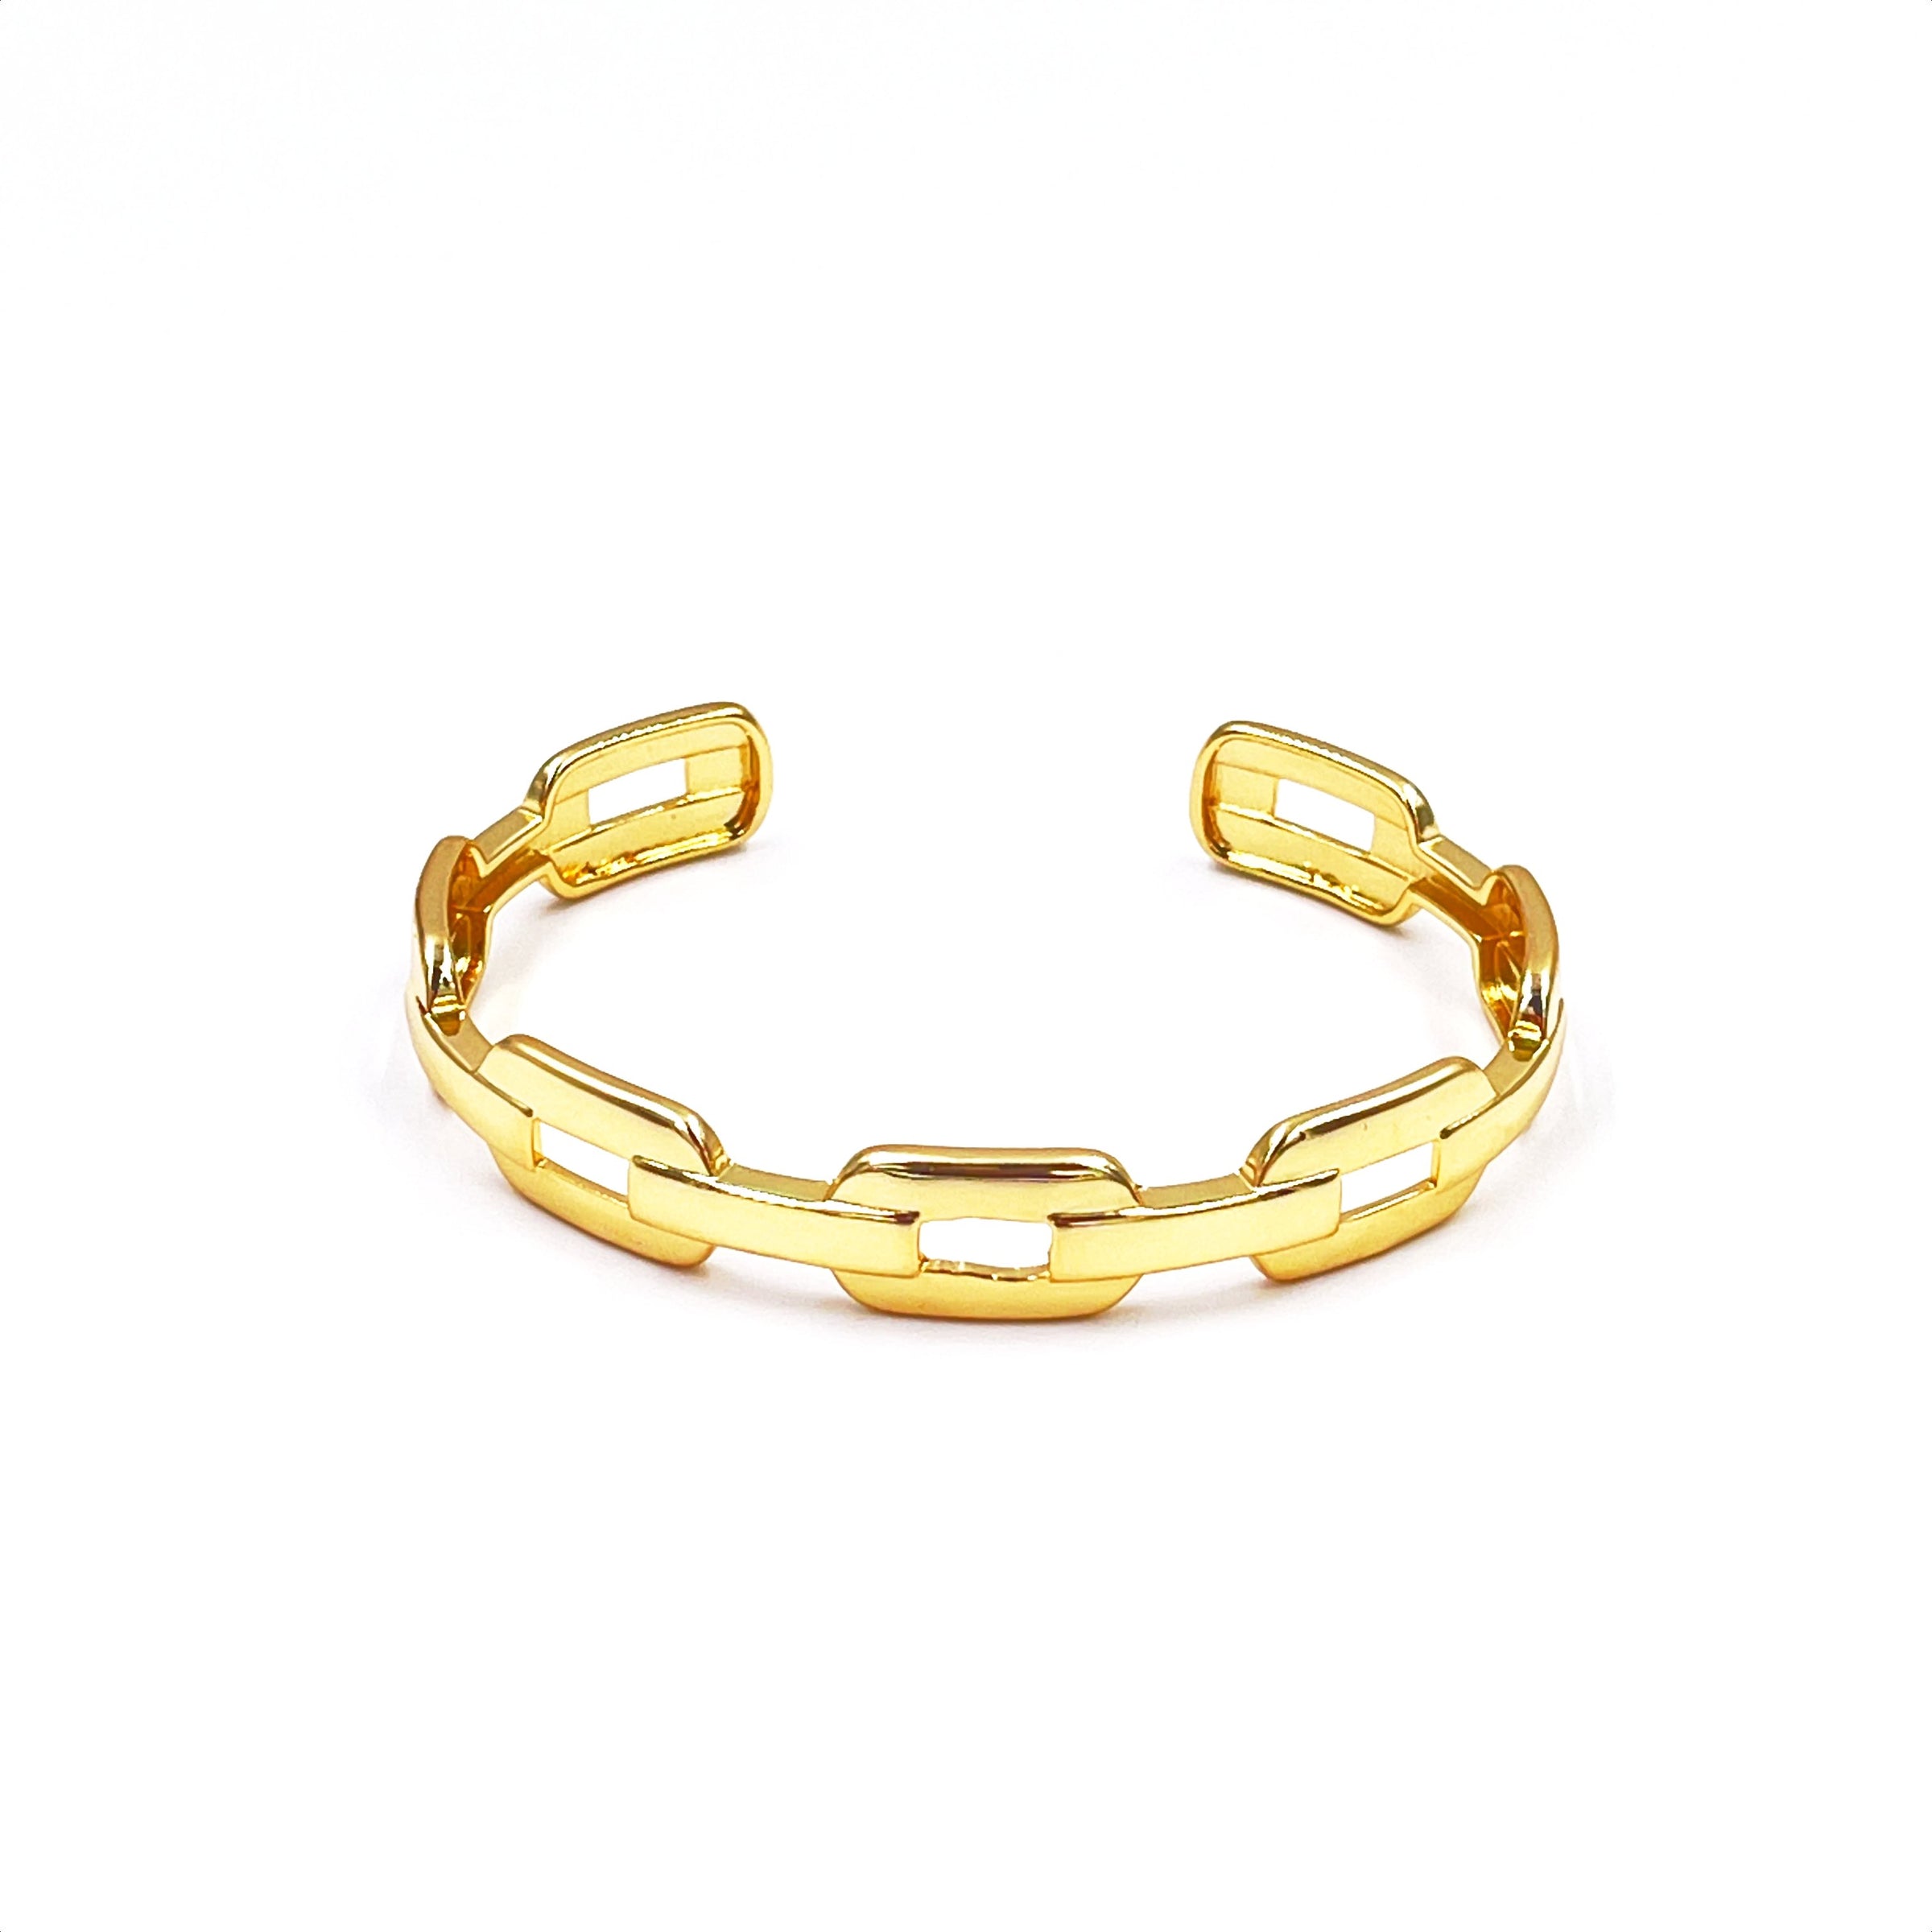 Men's Gold Plated Stainless Steel Curb Chain Bracelet | Eve's Addiction